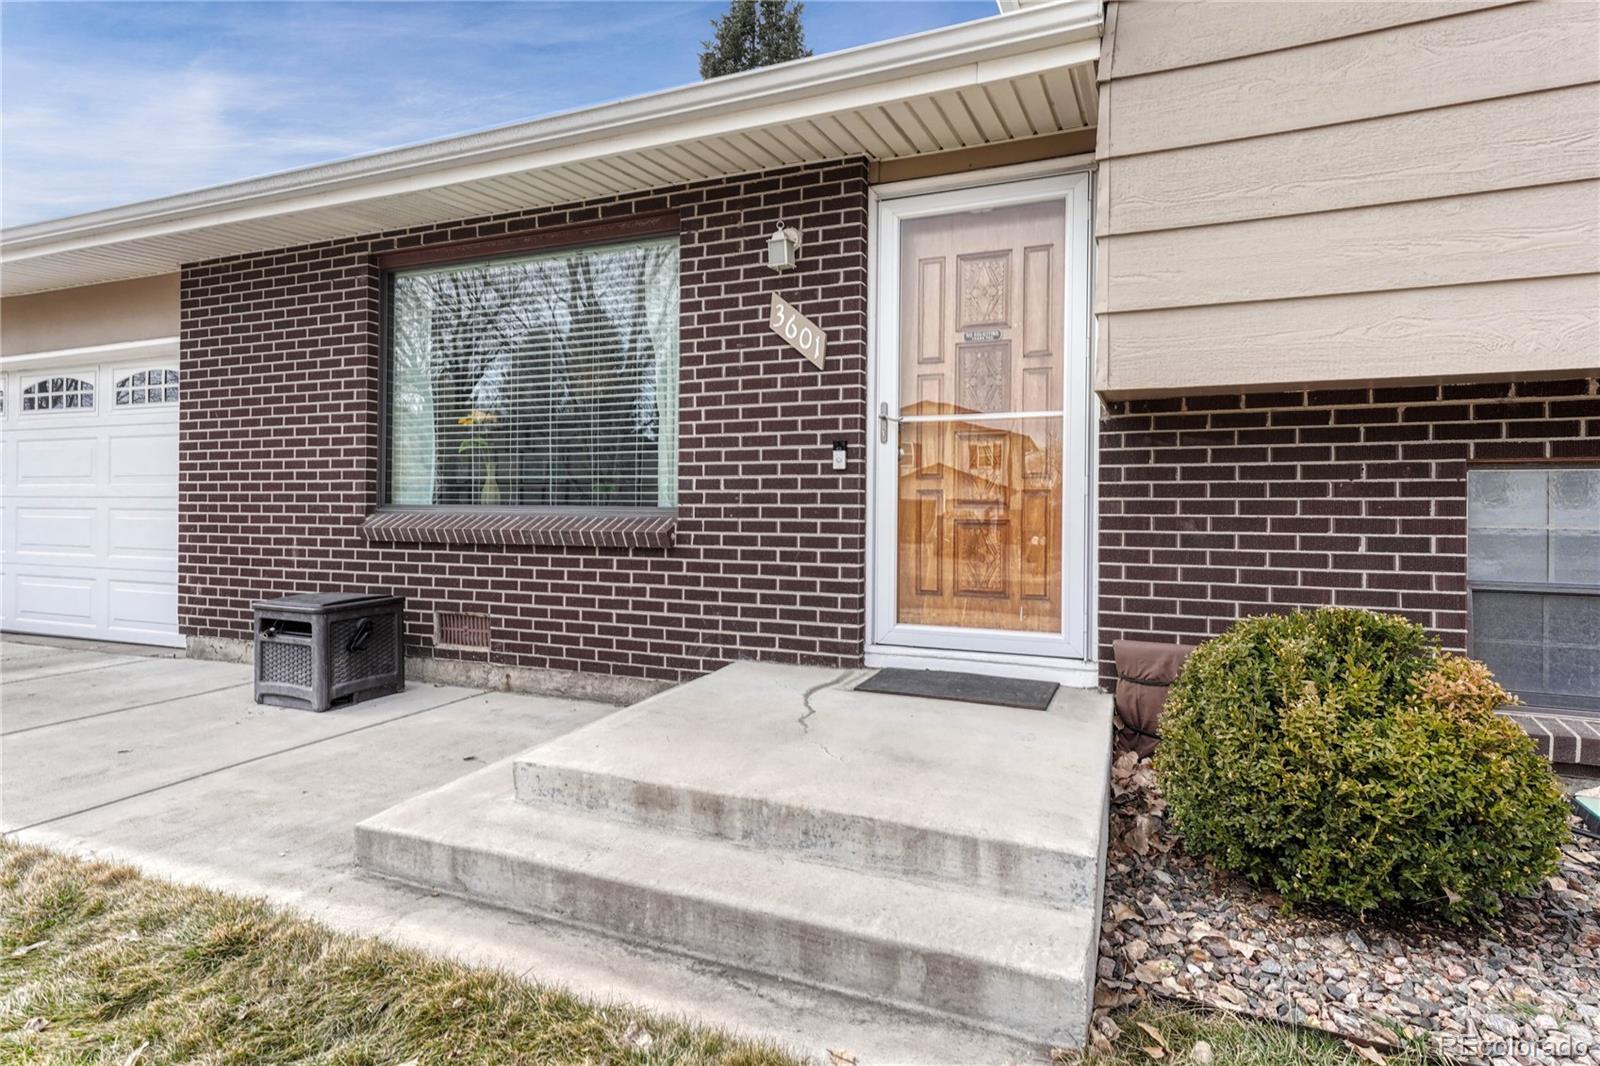 3601 s marshall way, Denver sold home. Closed on 2024-03-21 for $587,270.